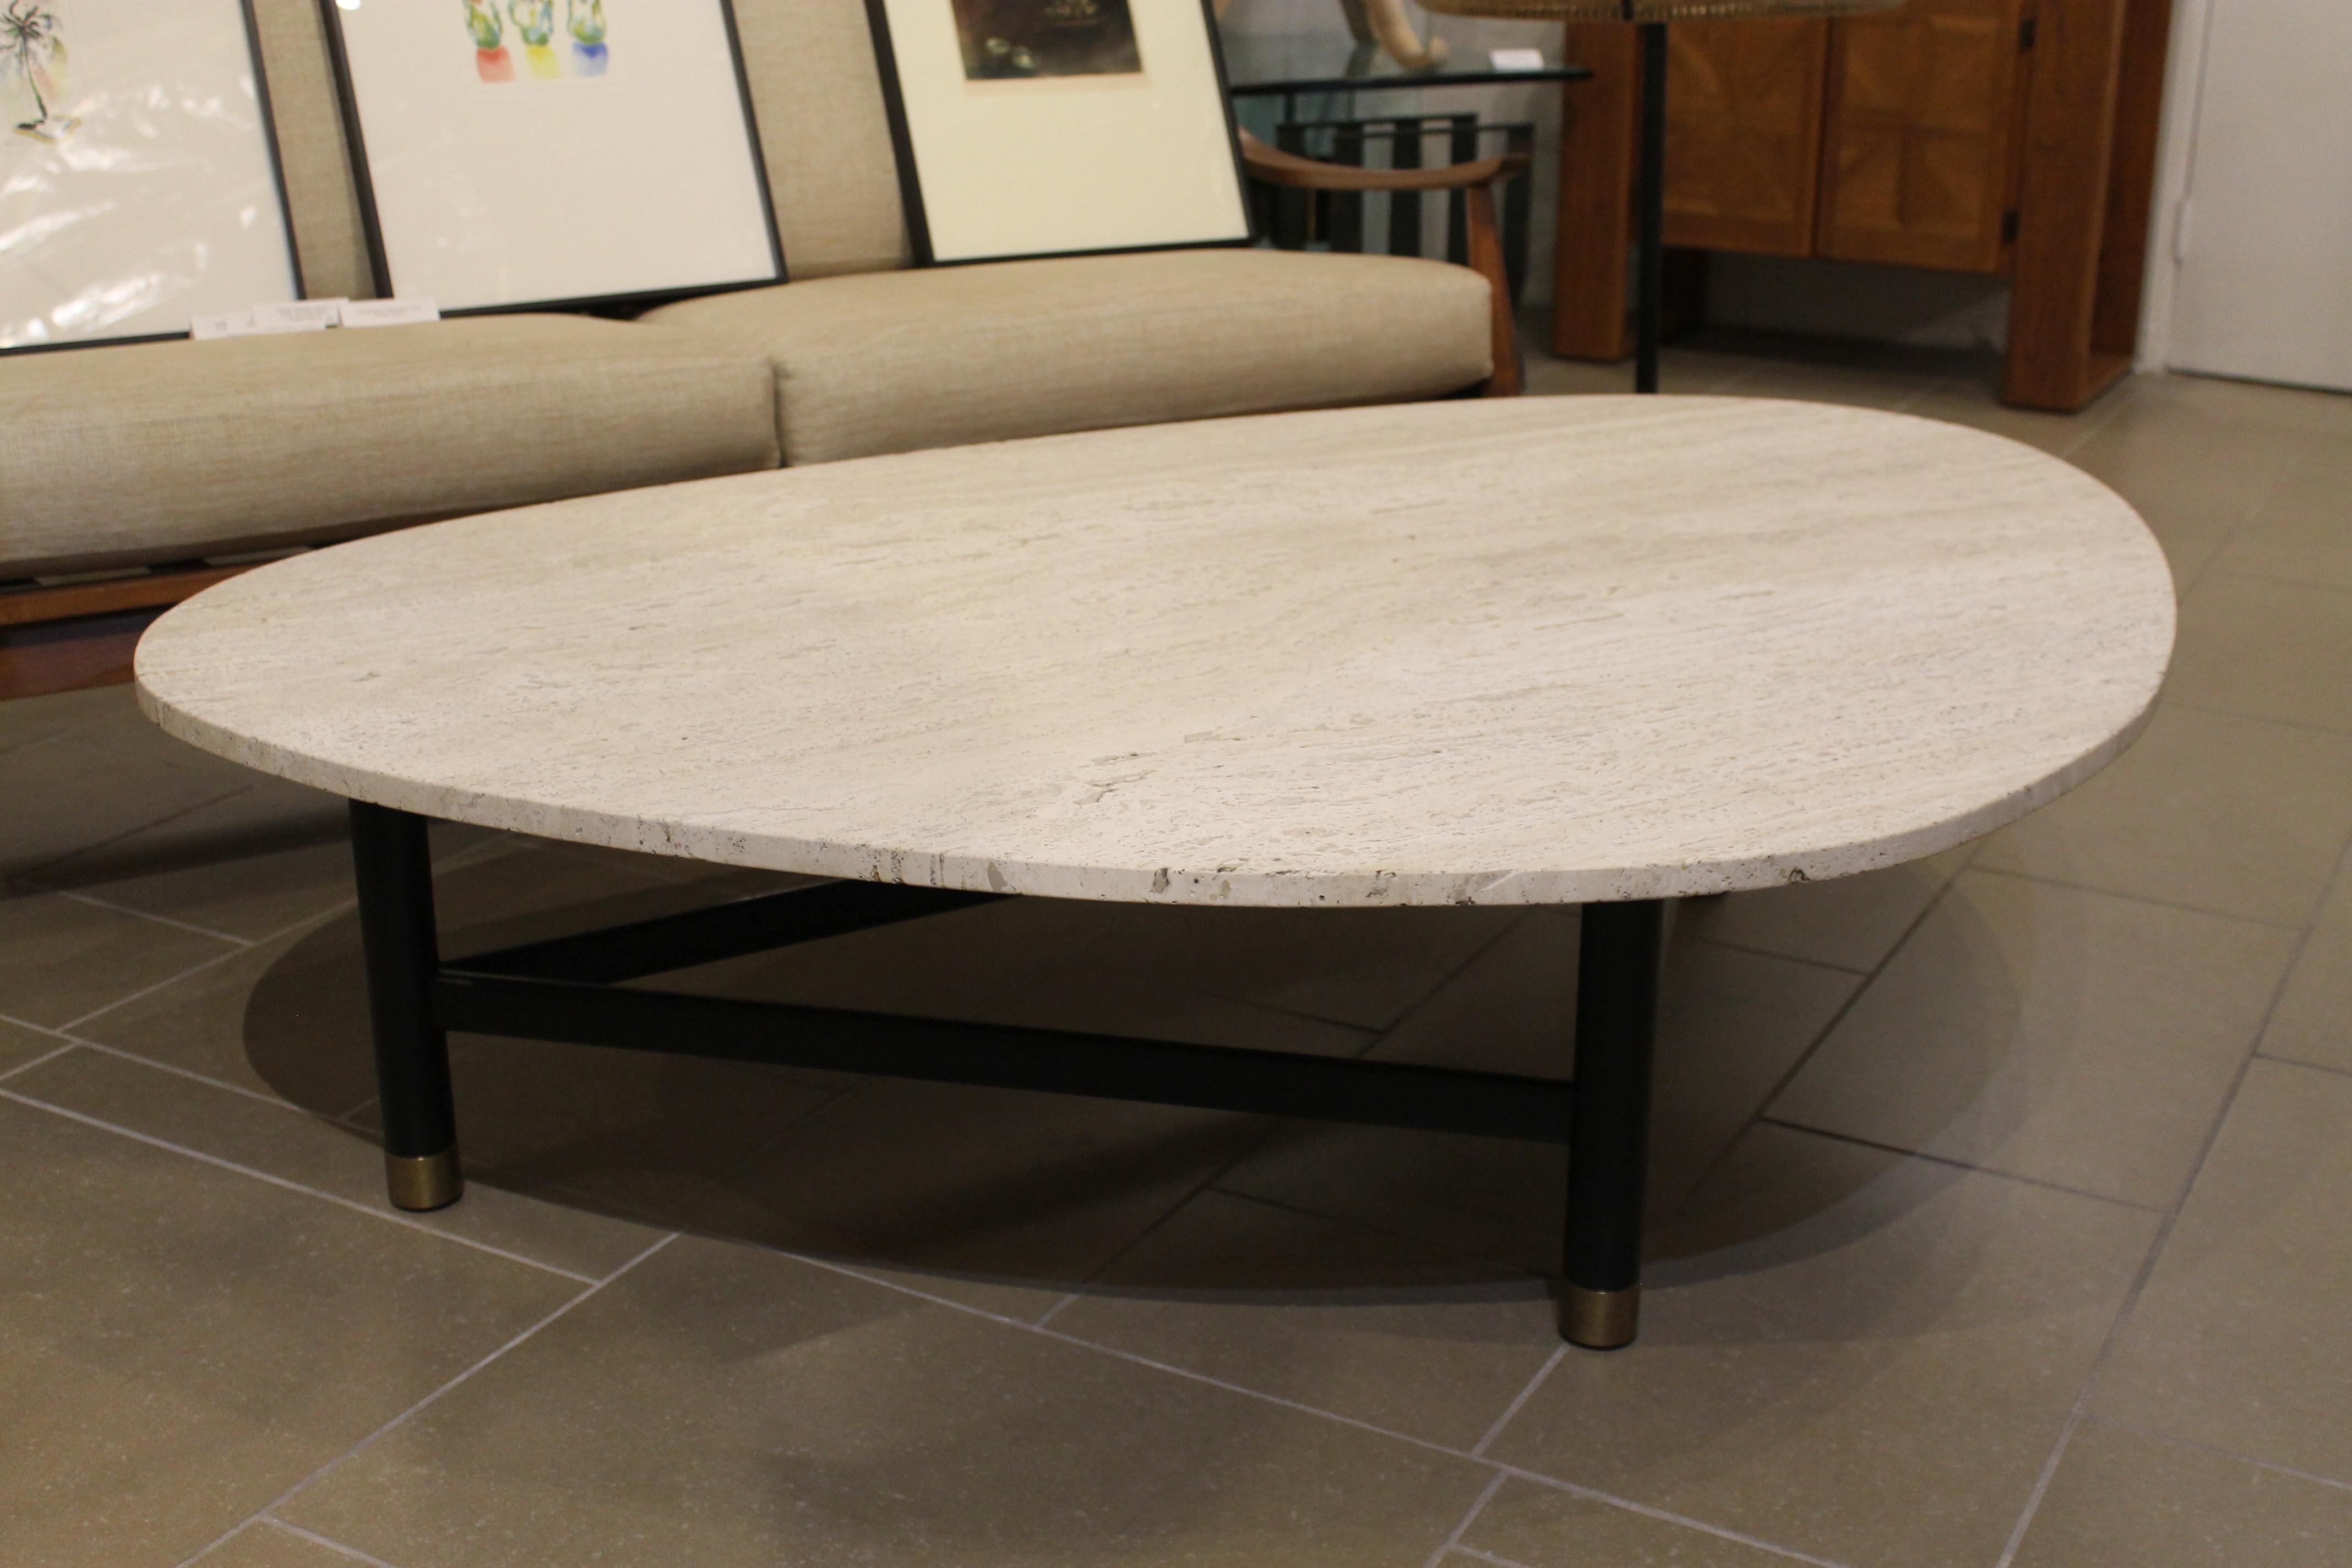 Iconic coffee table by Harvey Probber with triangular shaped travertine top and wood base. Brass caps on feet. Base has been professionally refinished and the travertine top is original to the table. Table measures: 60